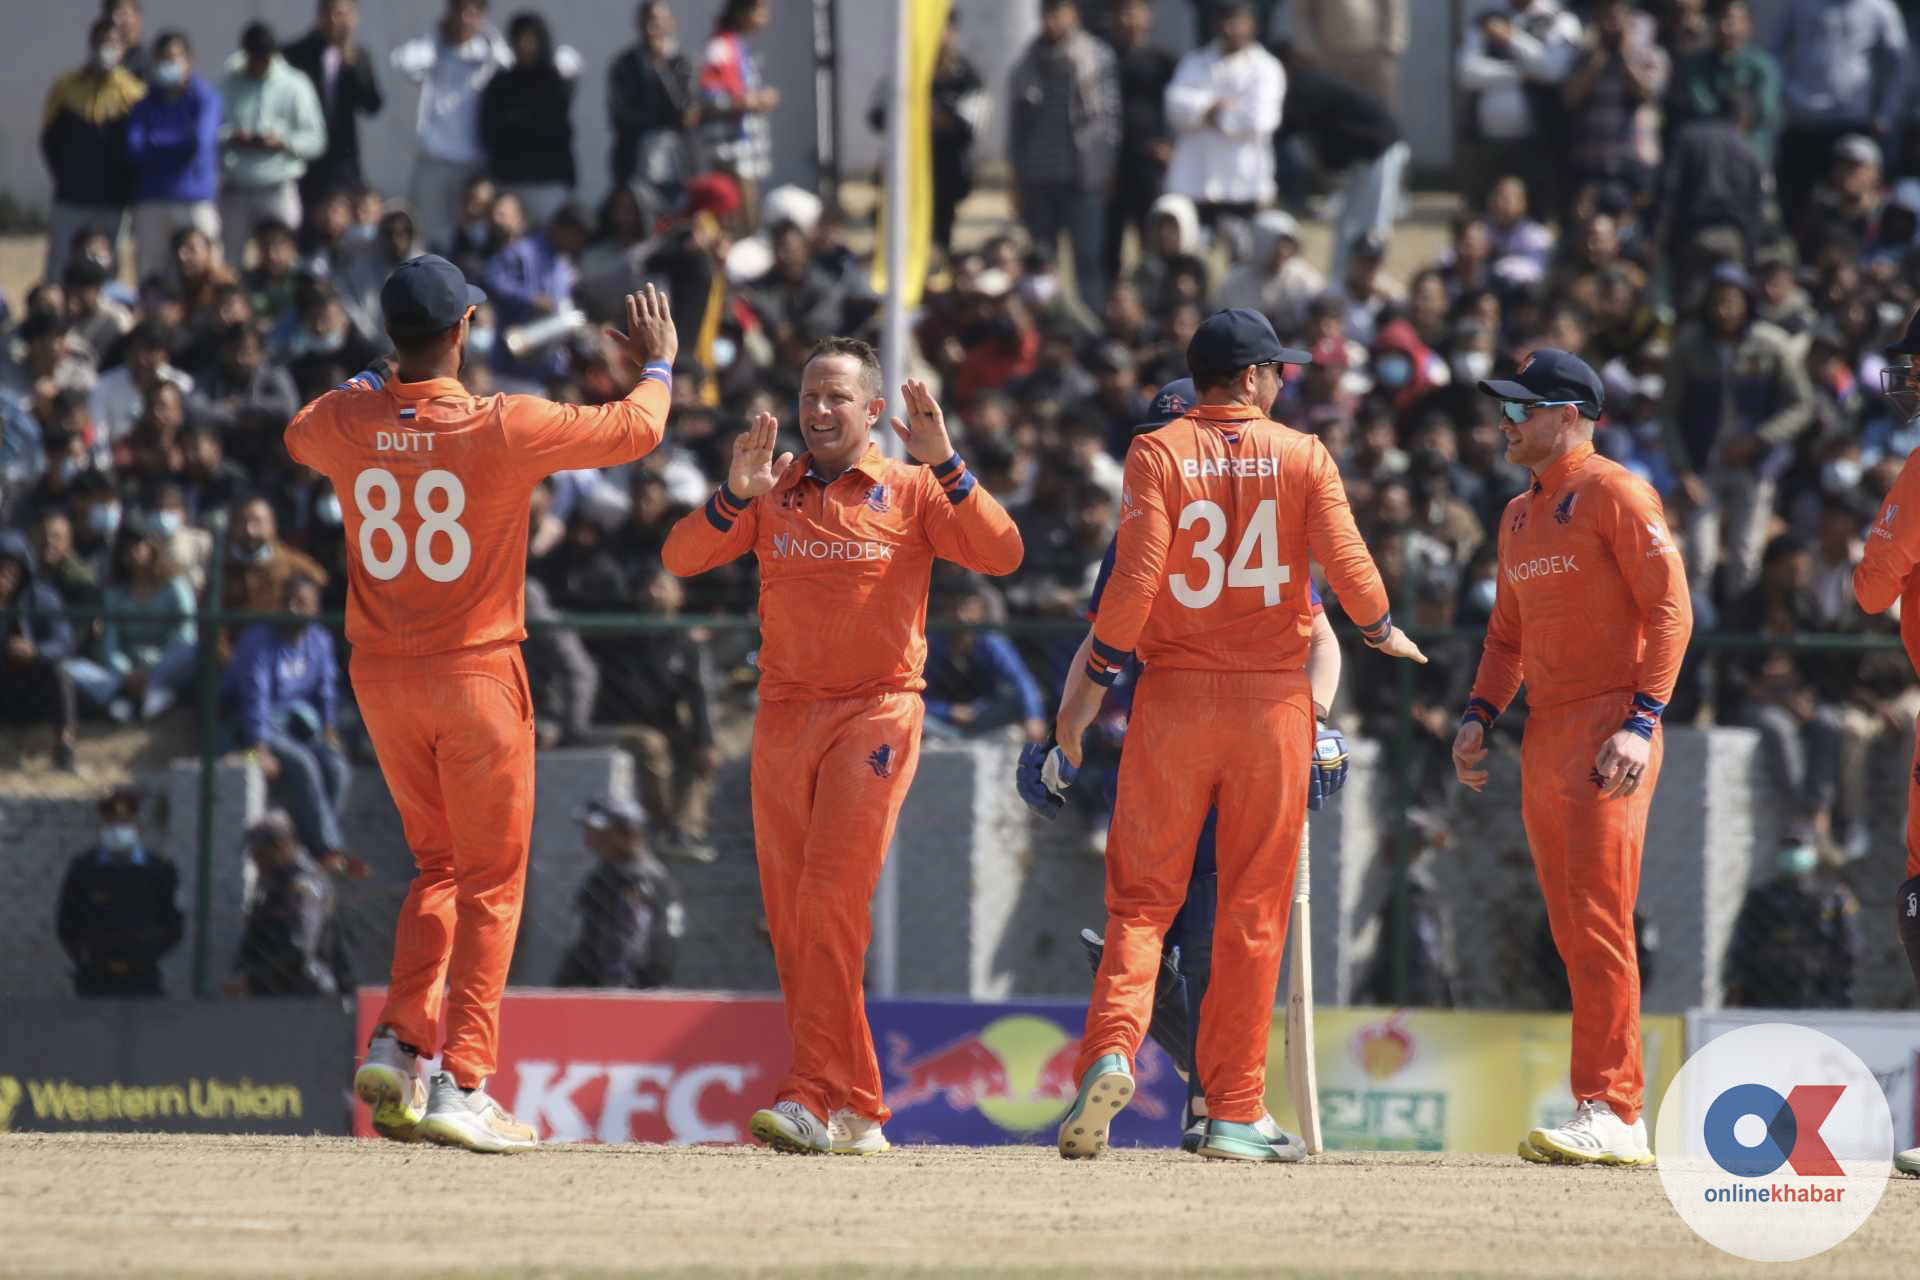 Nepal lose a thriller against the Netherlands